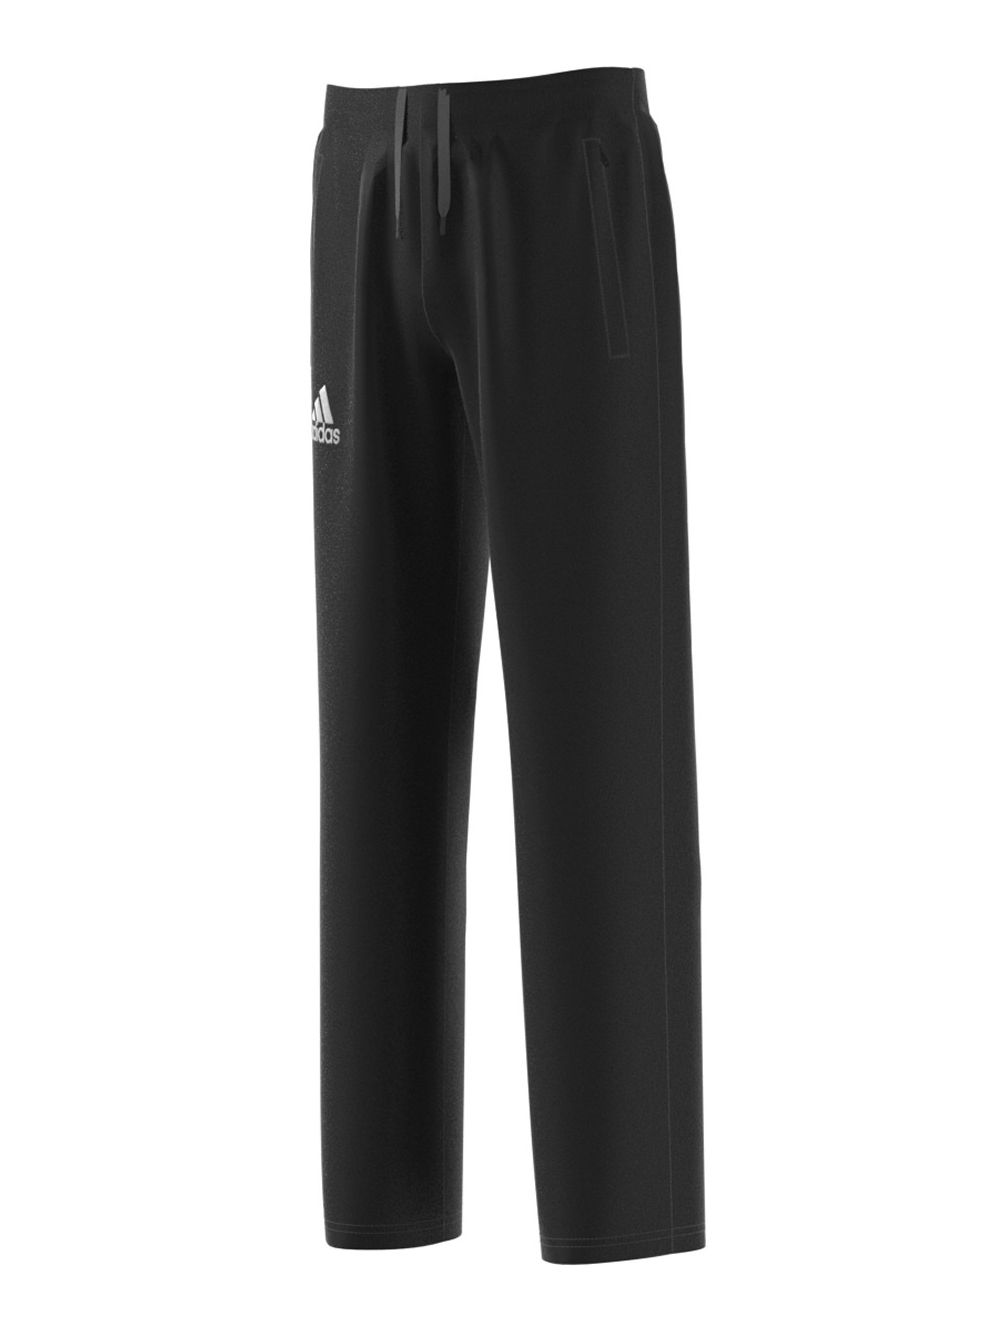 Adidas Youth Fleece Pant | Volleyball Warehouse